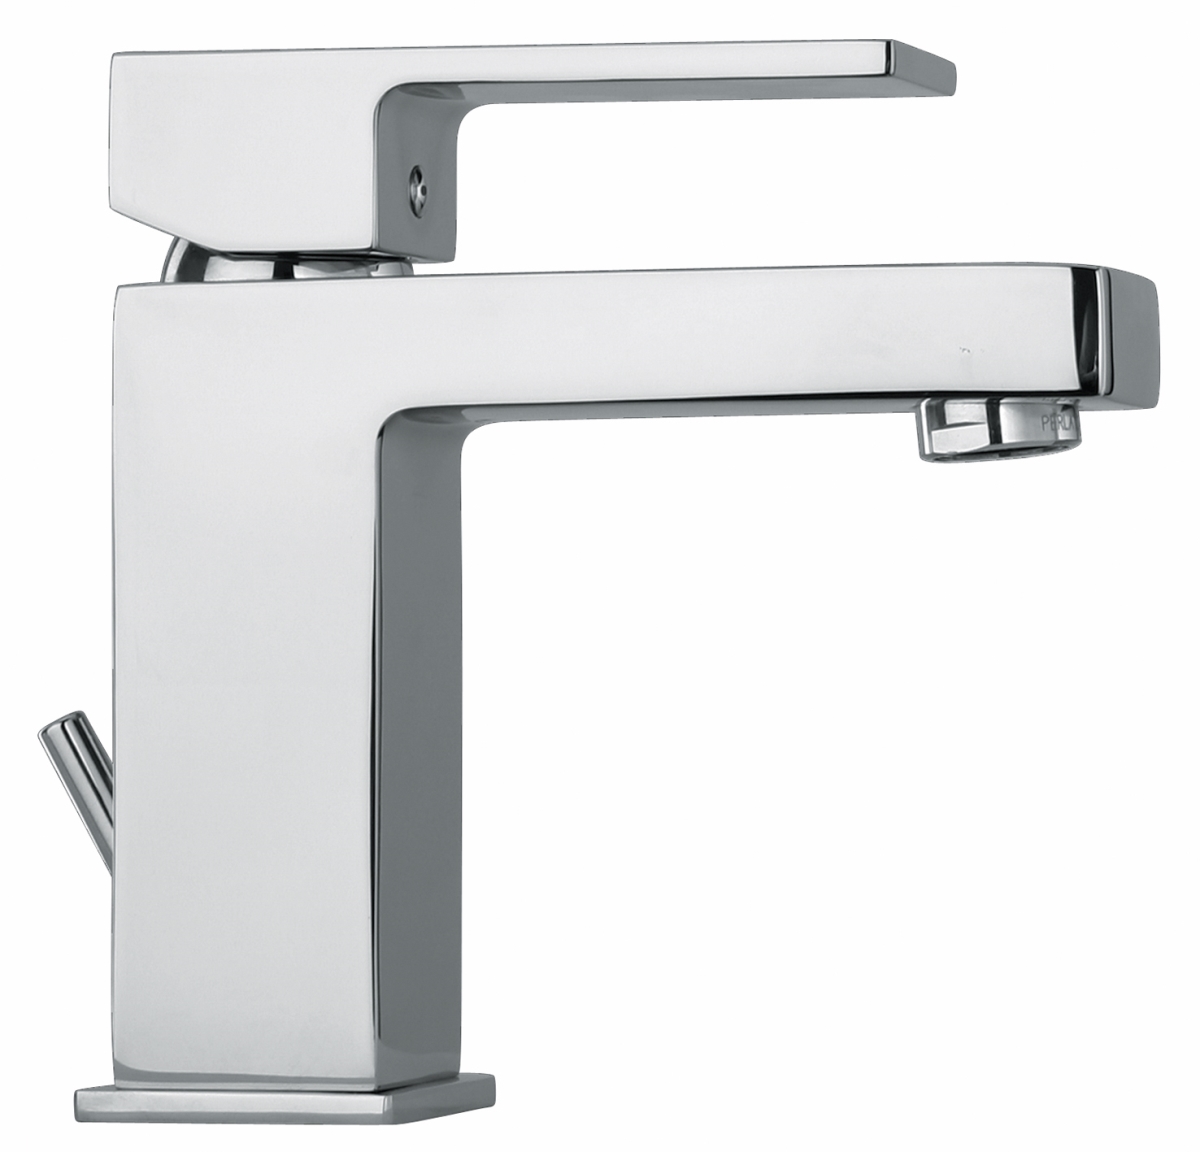 12211-30 Faucets Single Lever Handle Lavatory Faucet With Linear Matched Spout, Matte Gray Finish Model